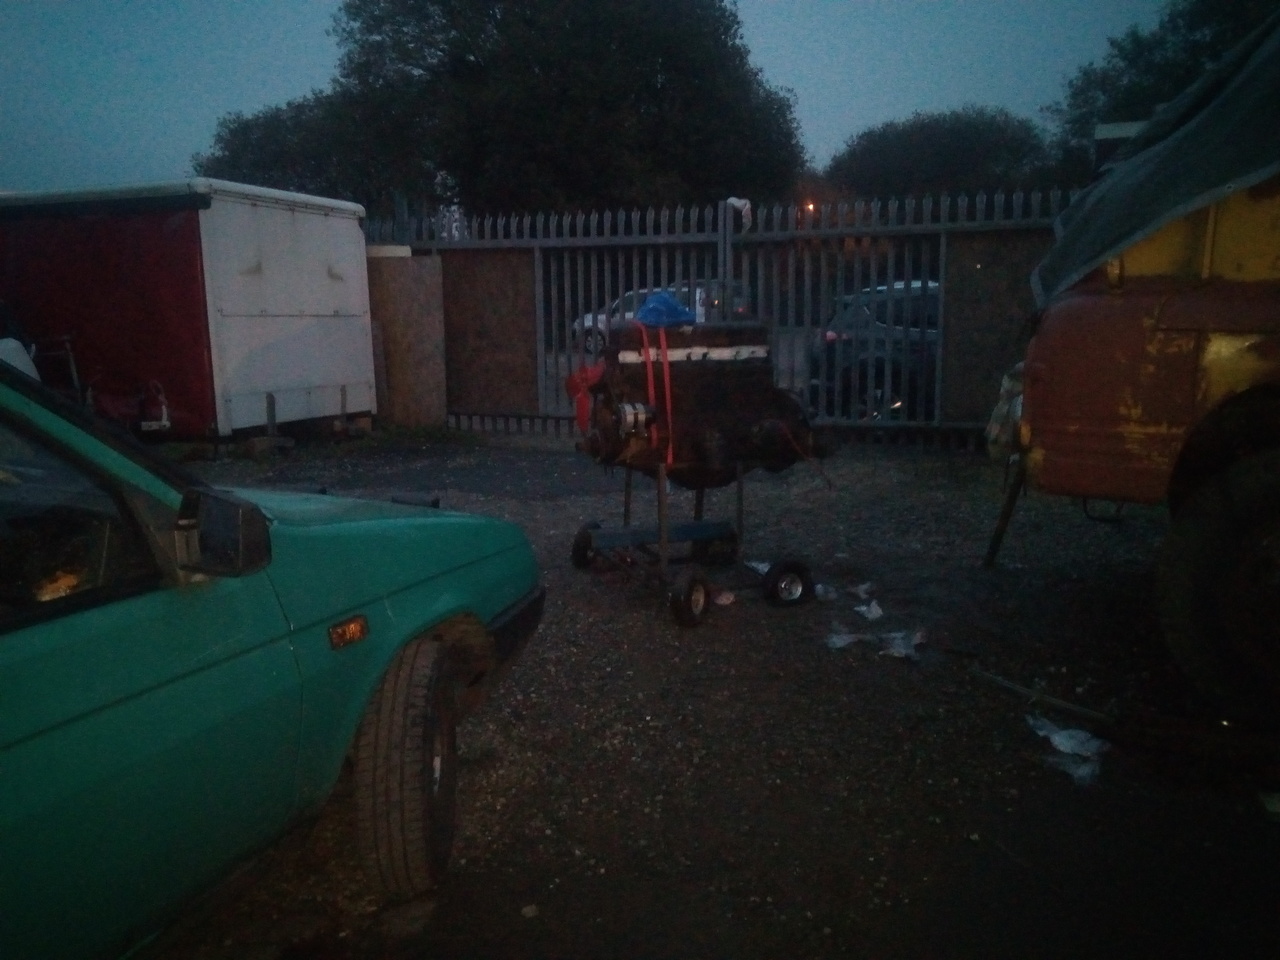 The engine, on its stand, now dragged a meter and a half away from the truck. Daylight is fading fast.